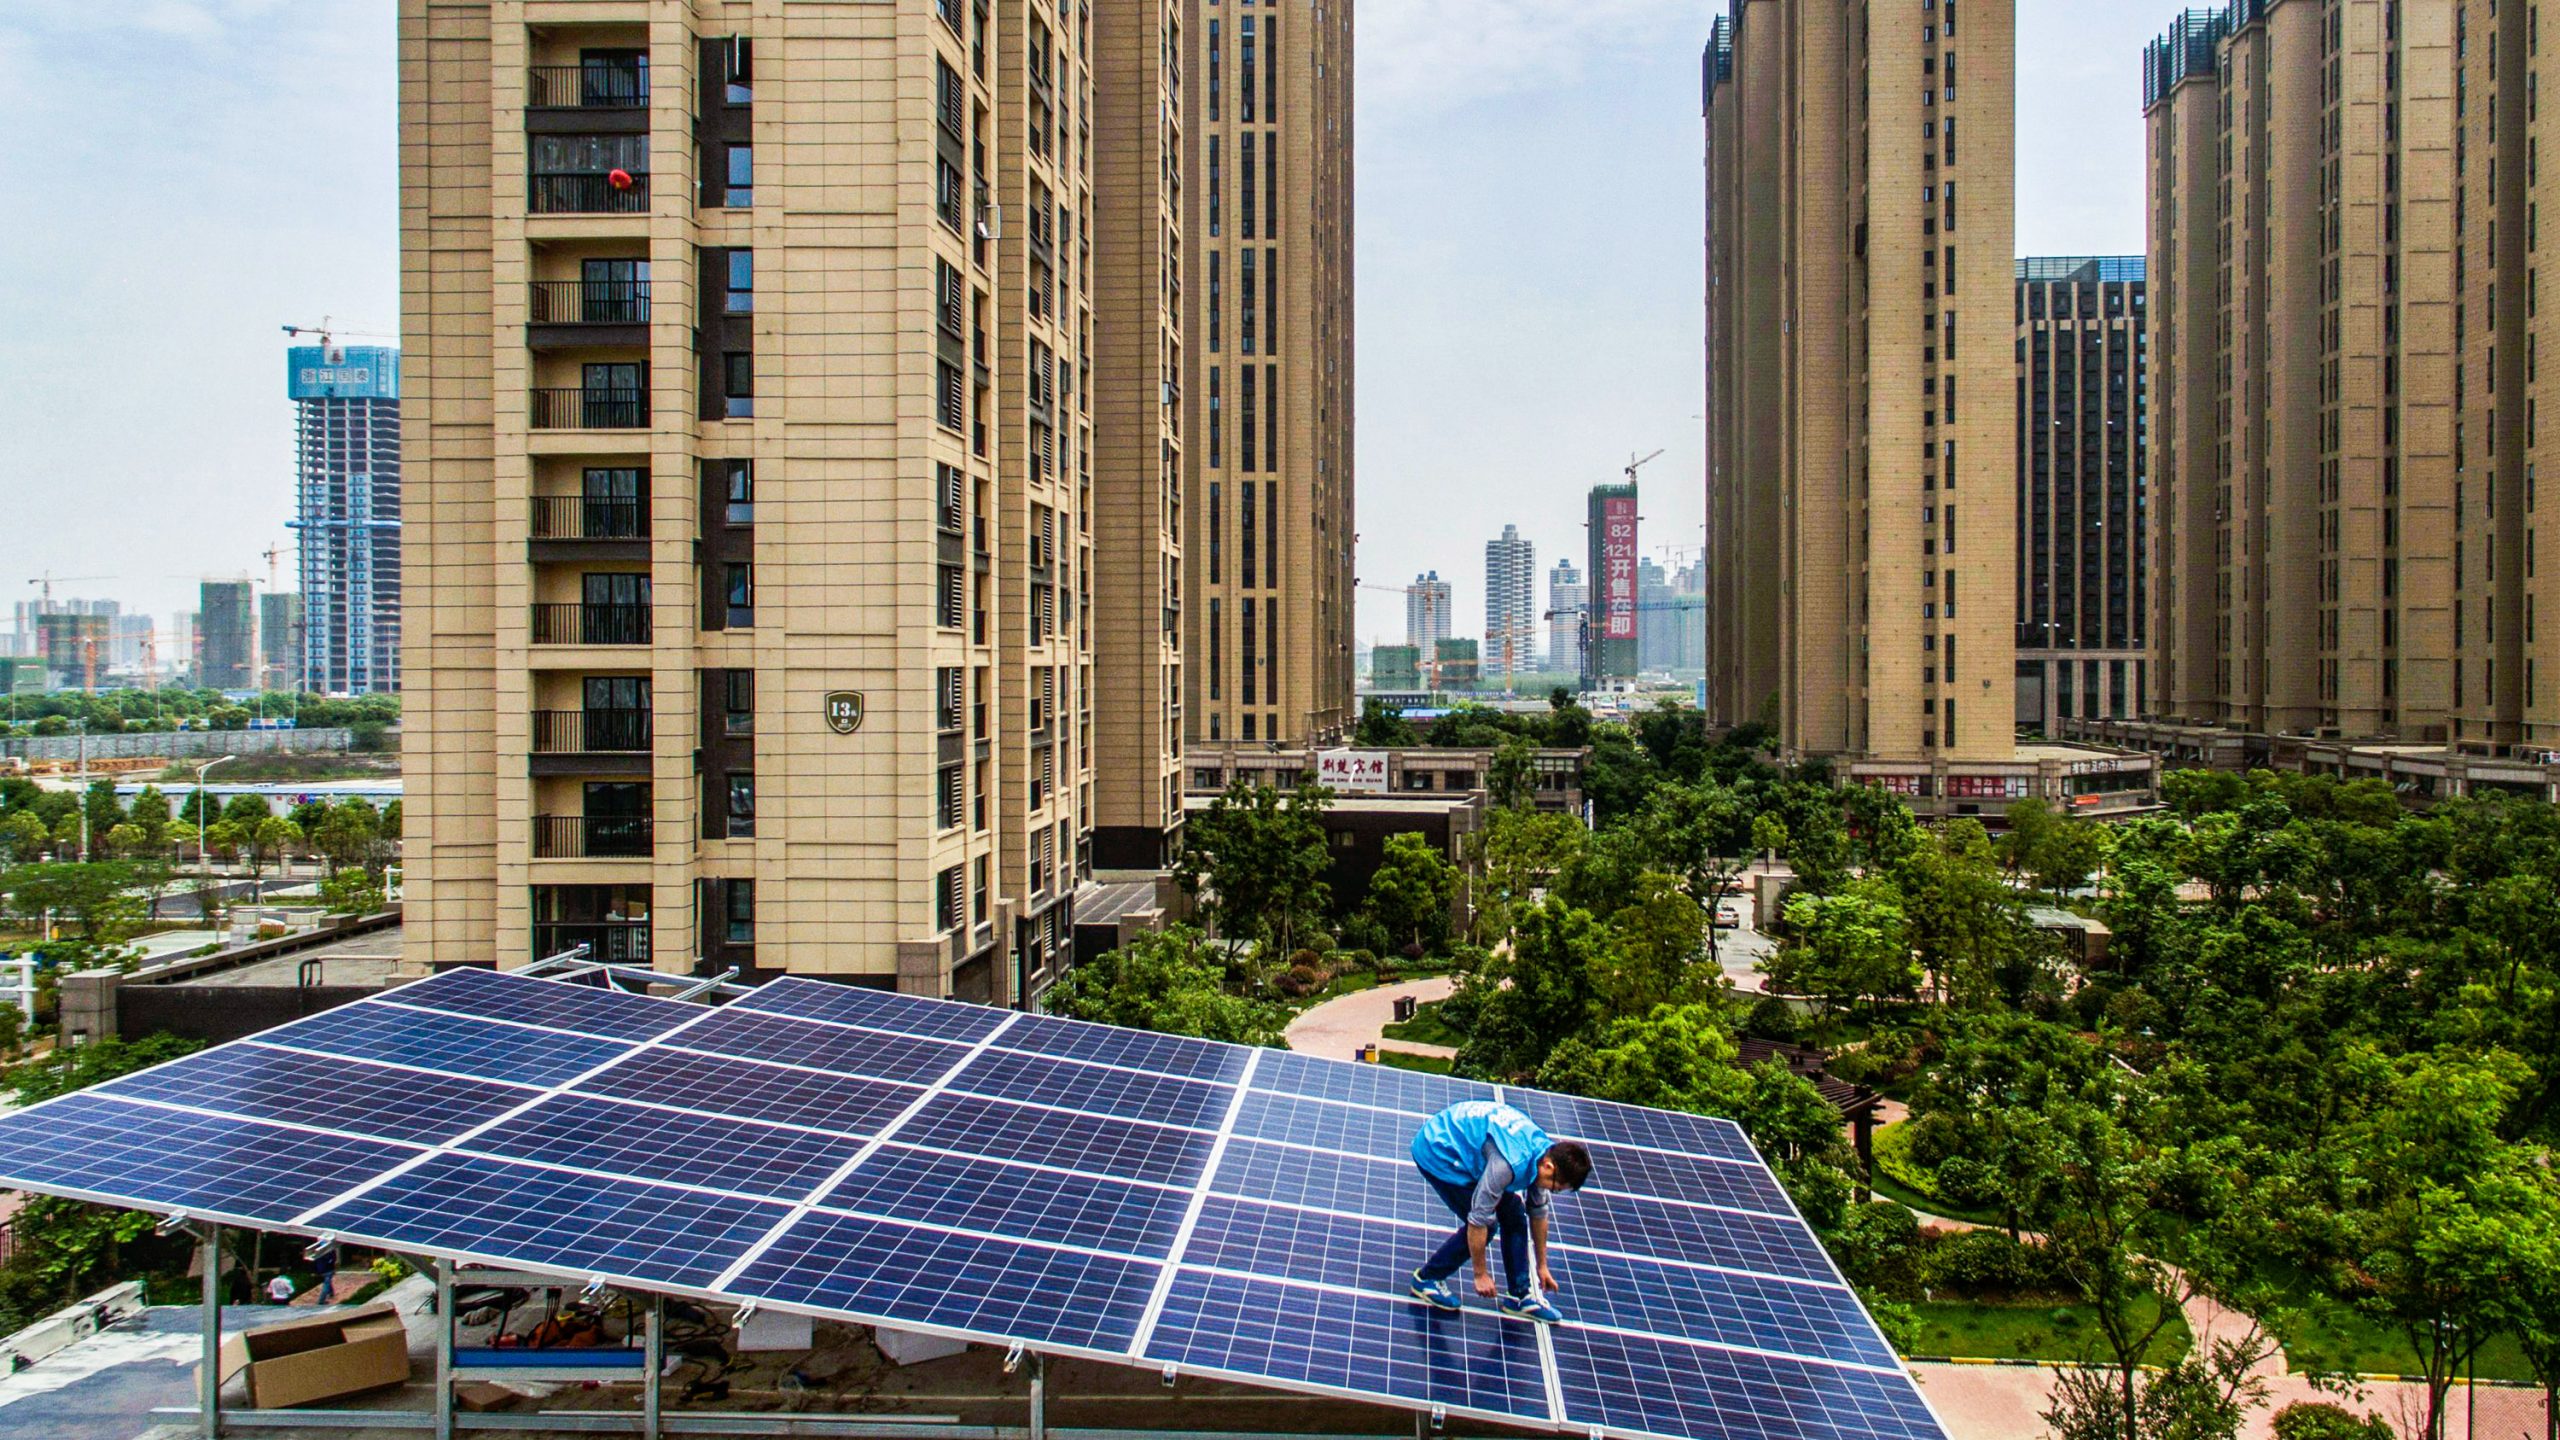 A worker from Wuhan Guangsheng Photovoltaic Company installs a solar panel project on the roof of a building